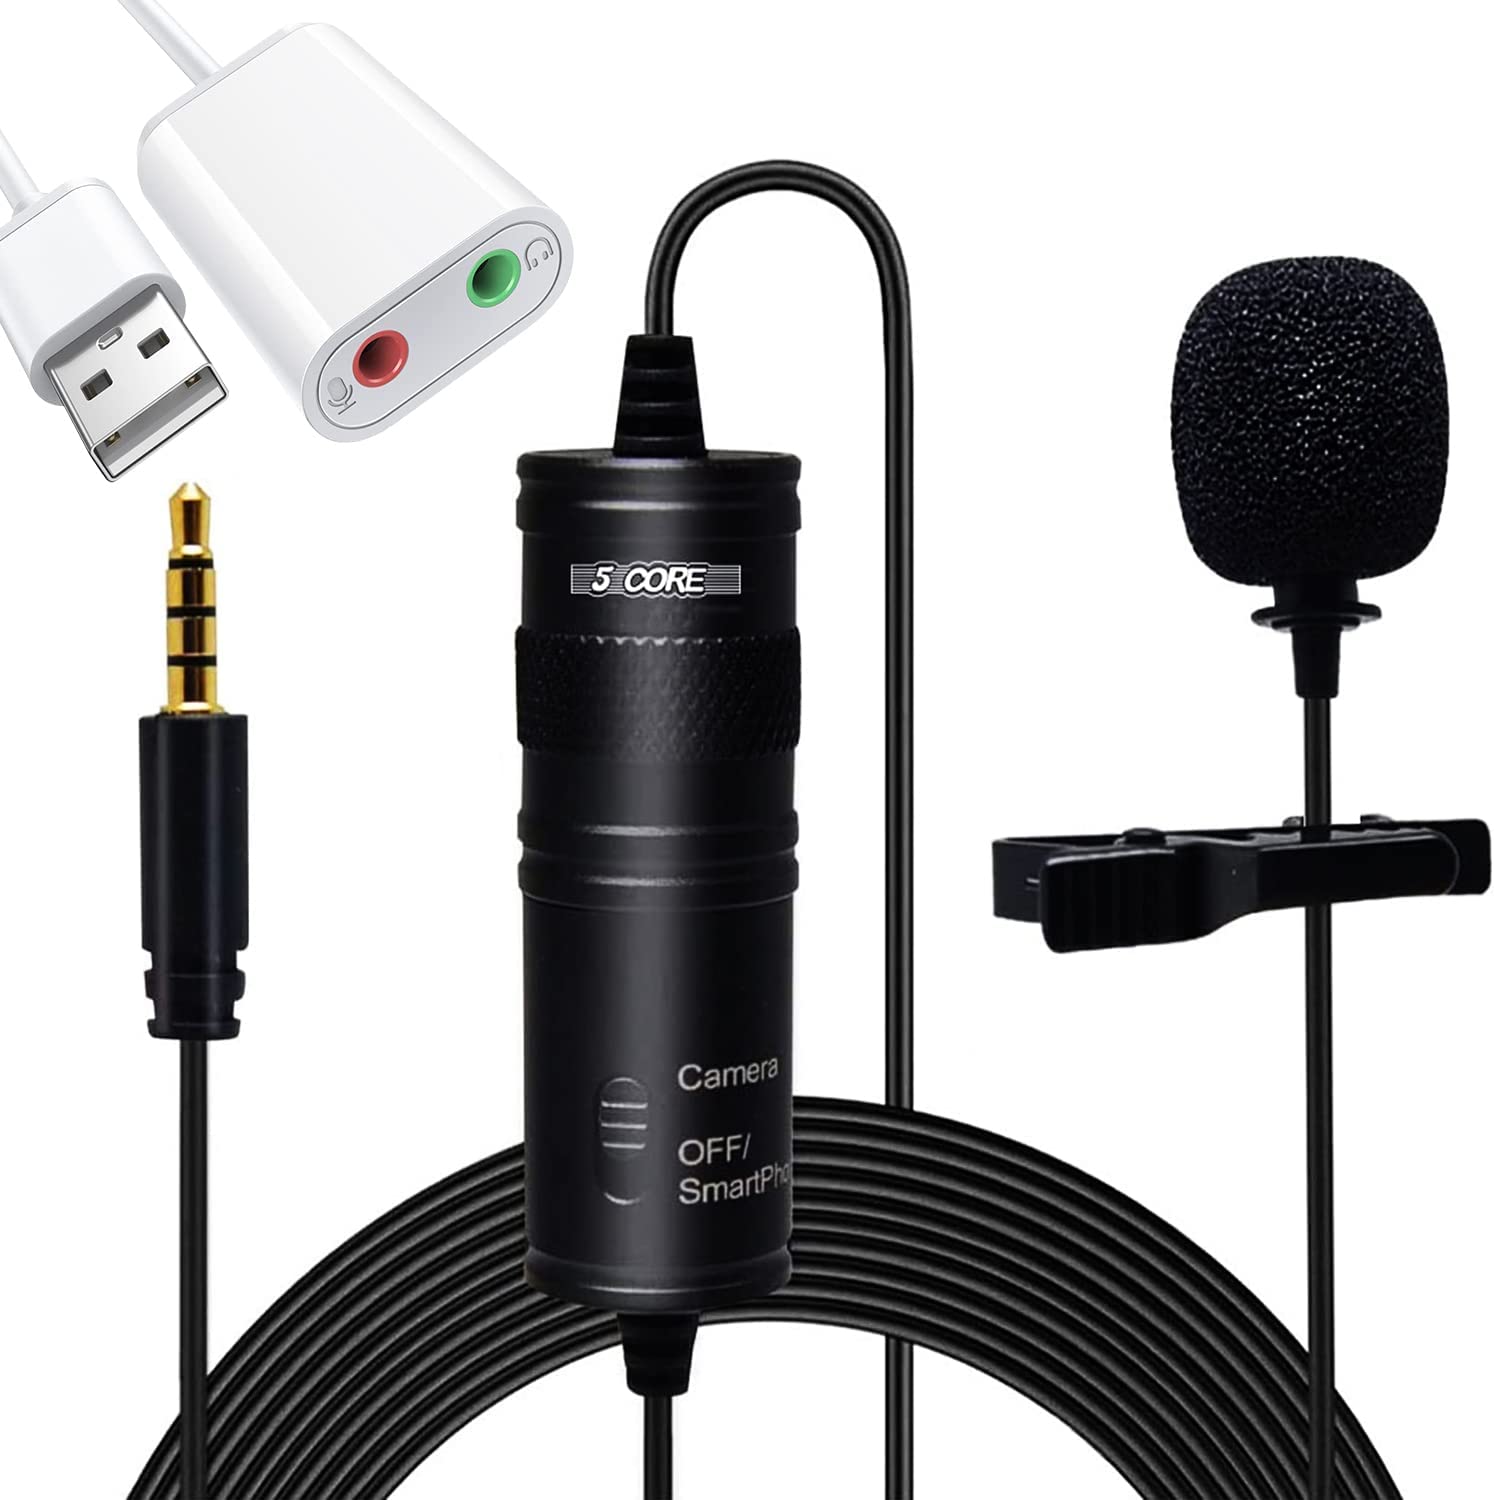 5 Core Lavalier Microphone for iPhone & Tablet External Clip On Mini Lapel Mic for Video Recording & Vlogging with 3.5mm Connector -CM 001 ADP